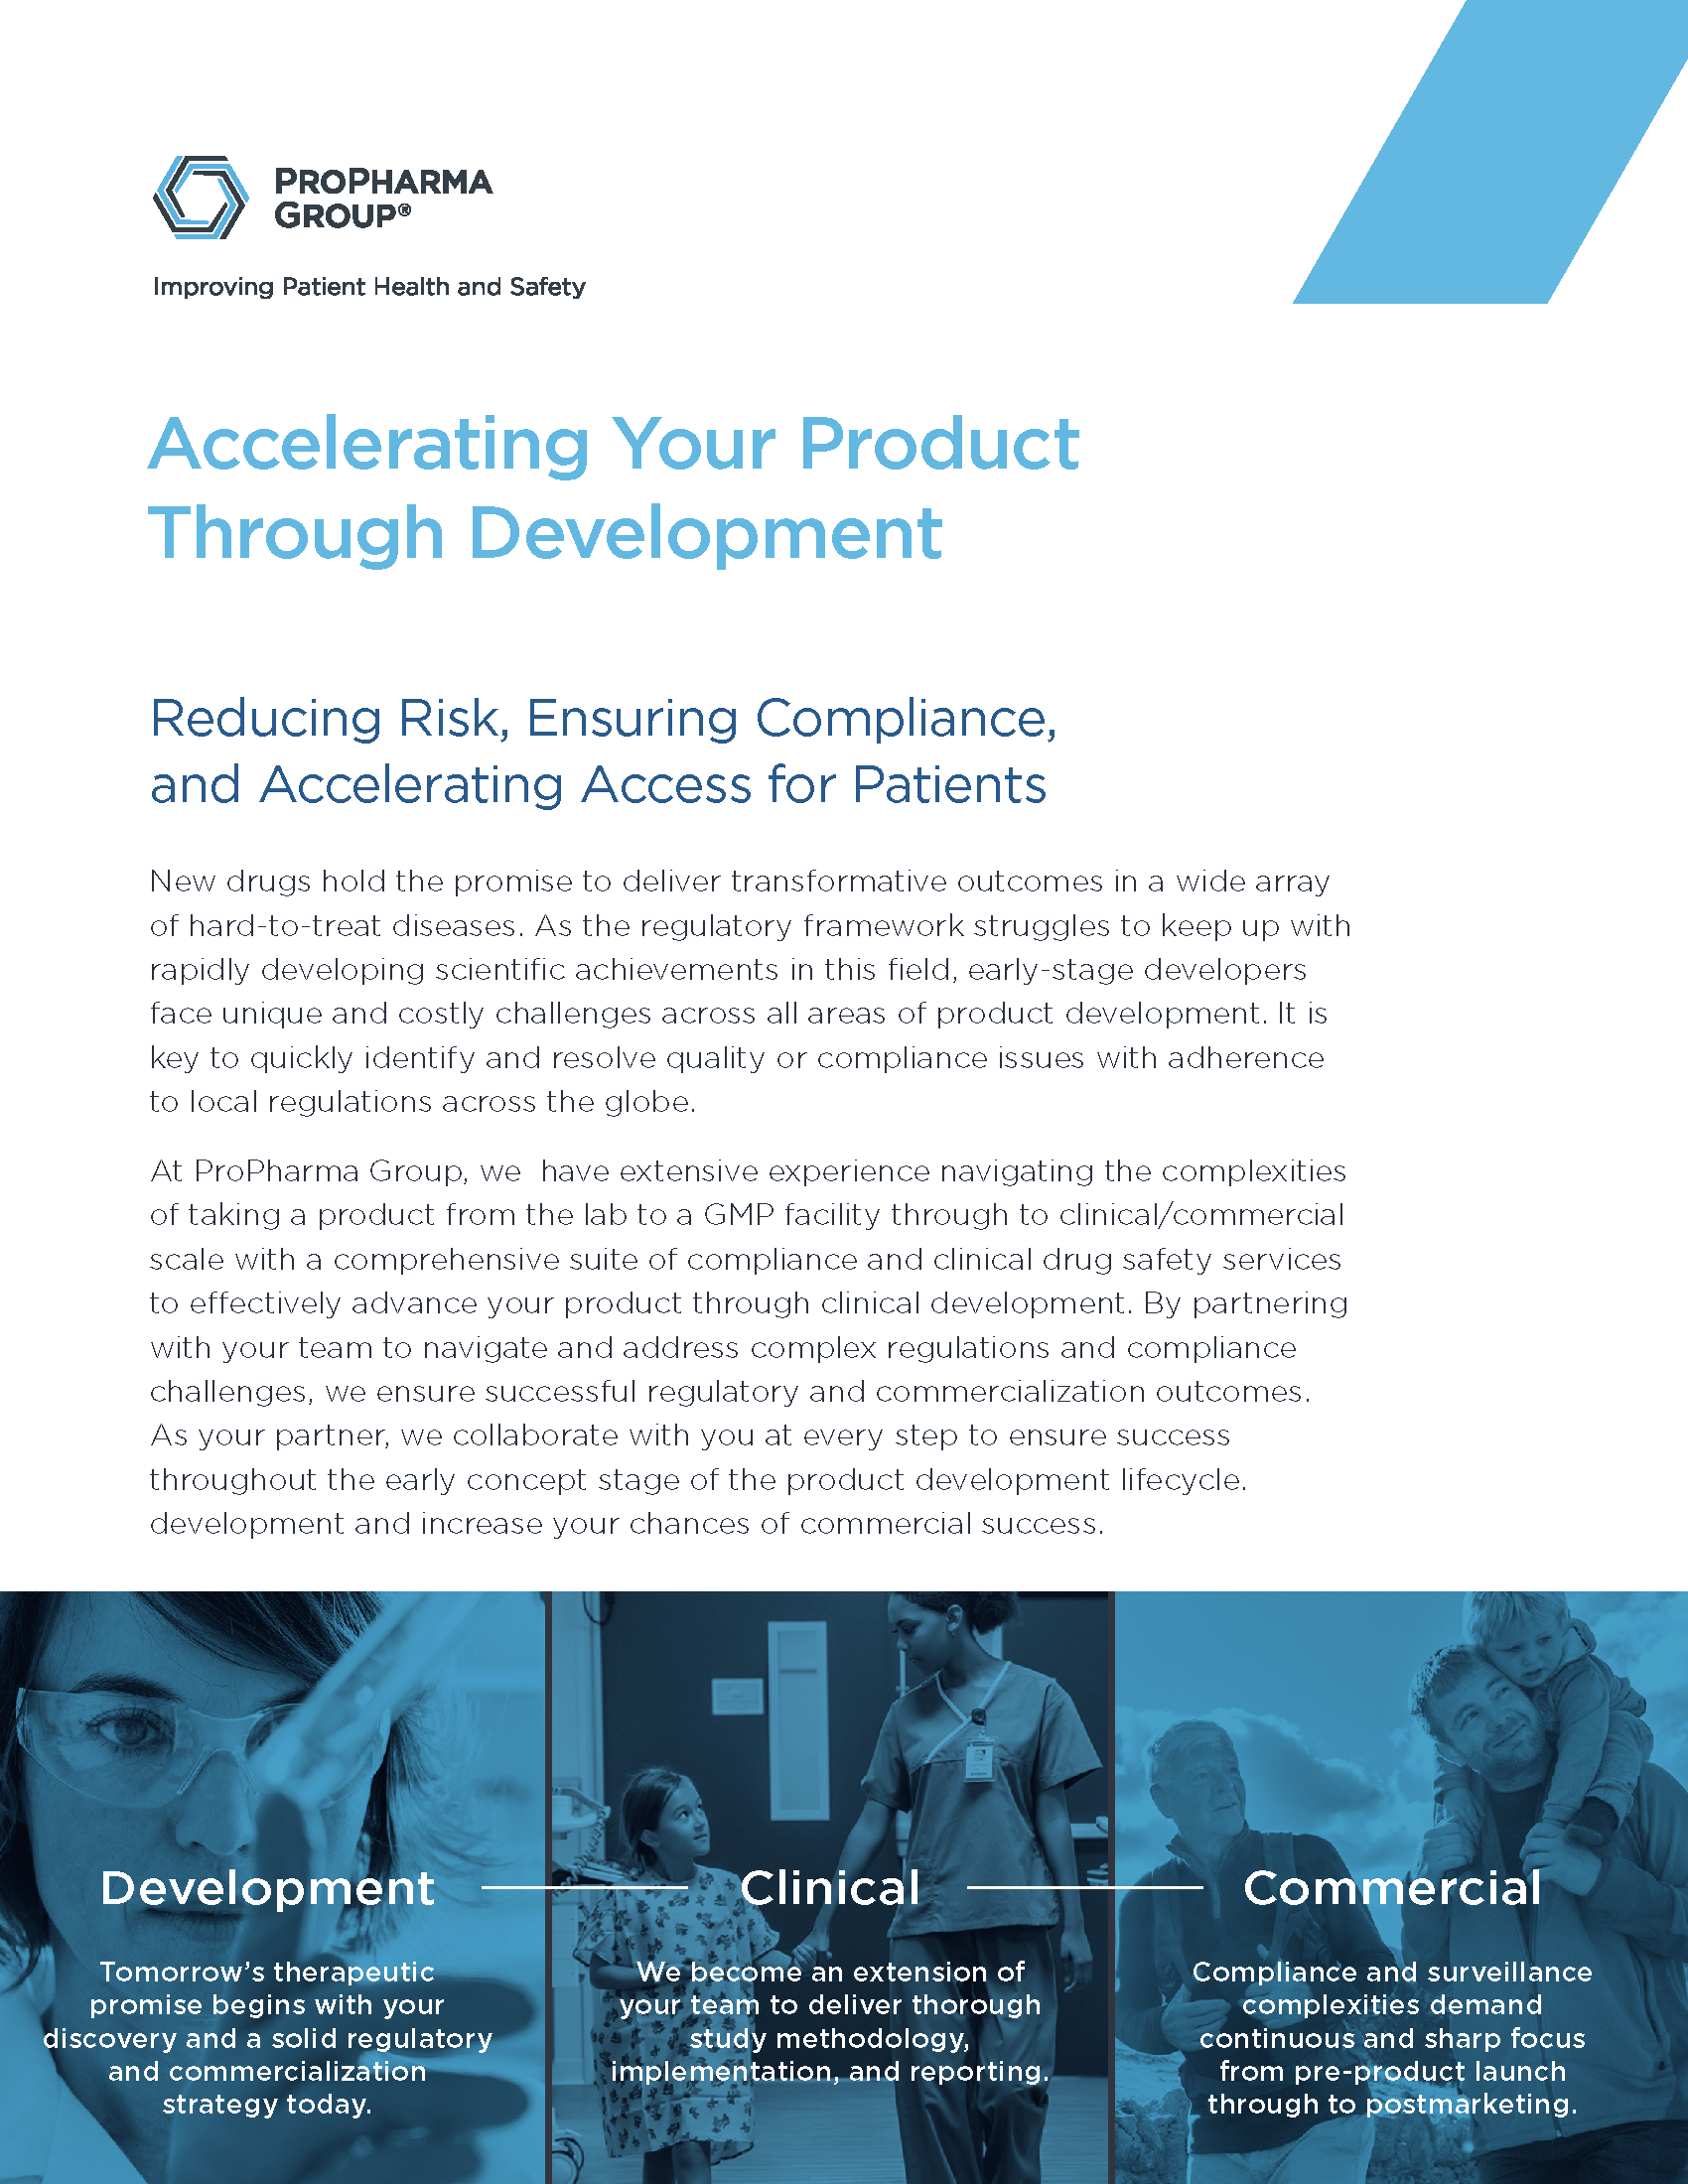 Accelerating Your Product Through Drug Development